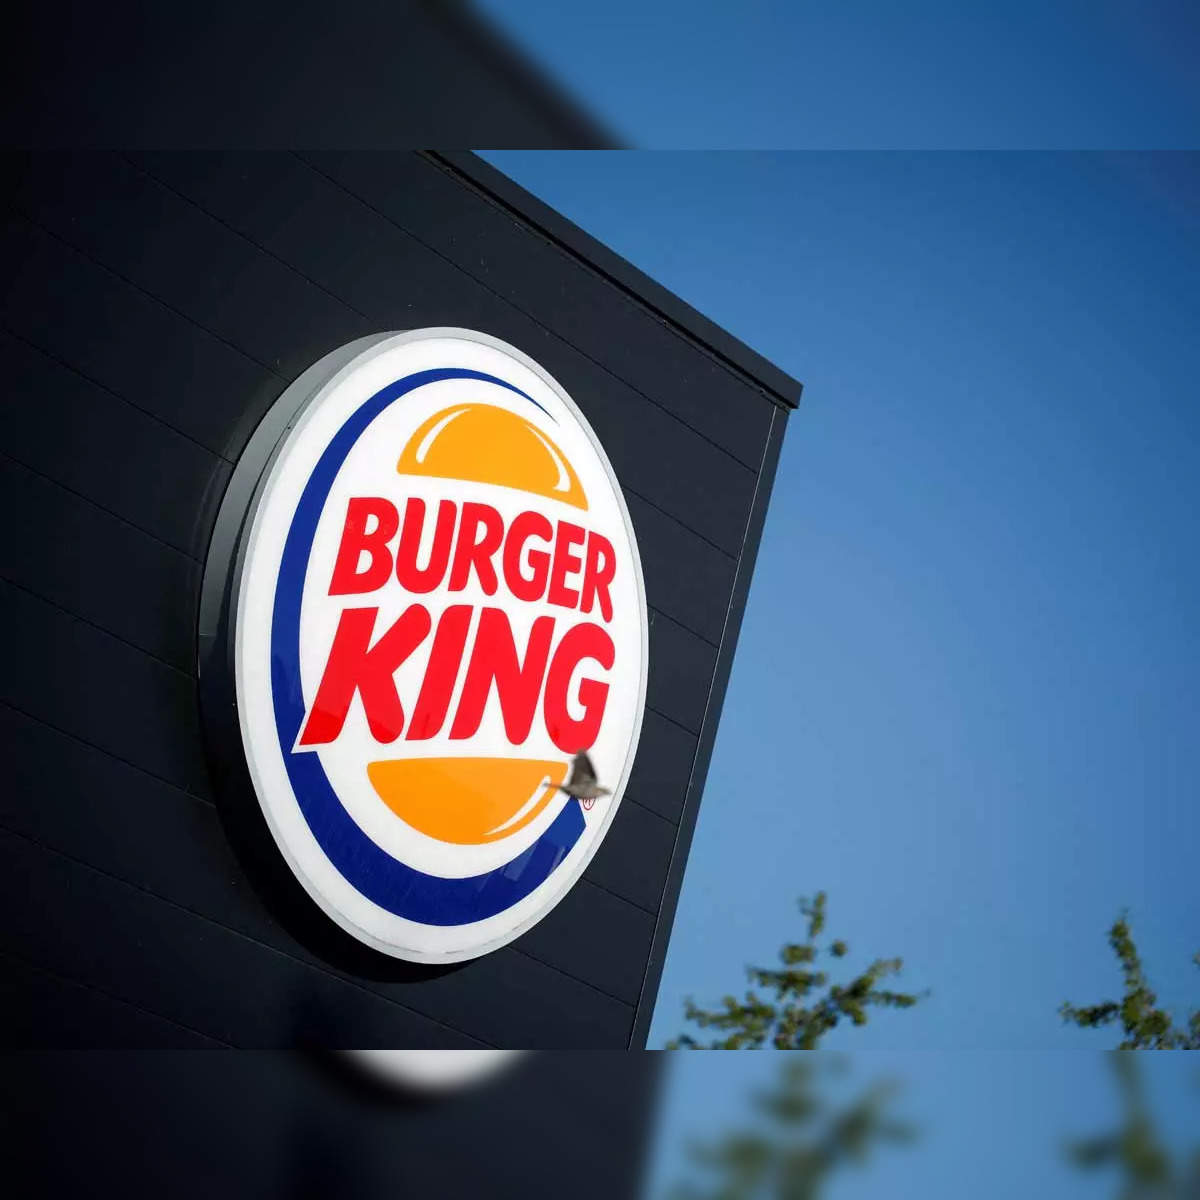 Burger King may end Pepsi tie-up, sign with rival Coke - The